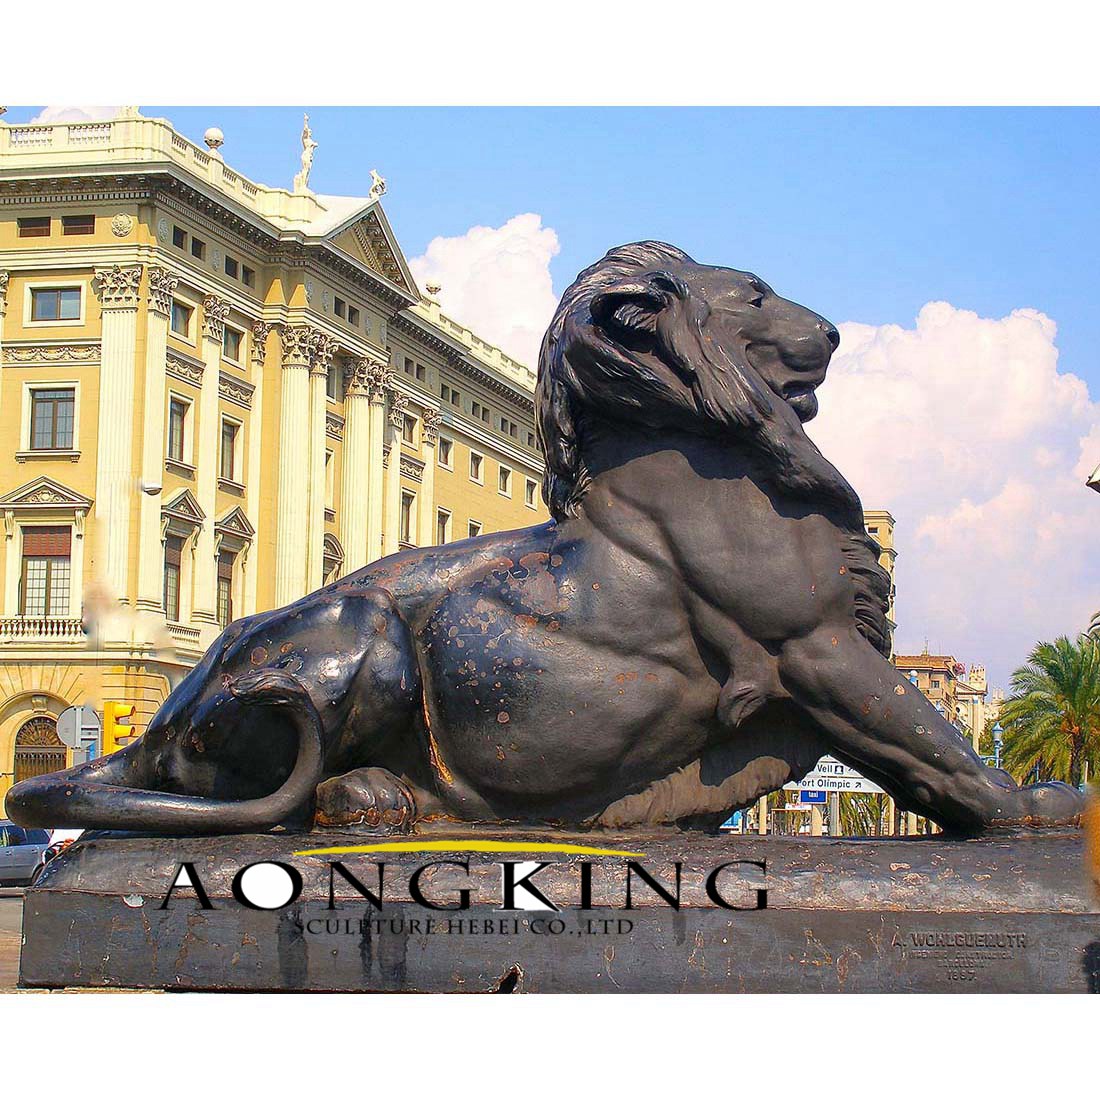 Large size black bronze lion statue on the street